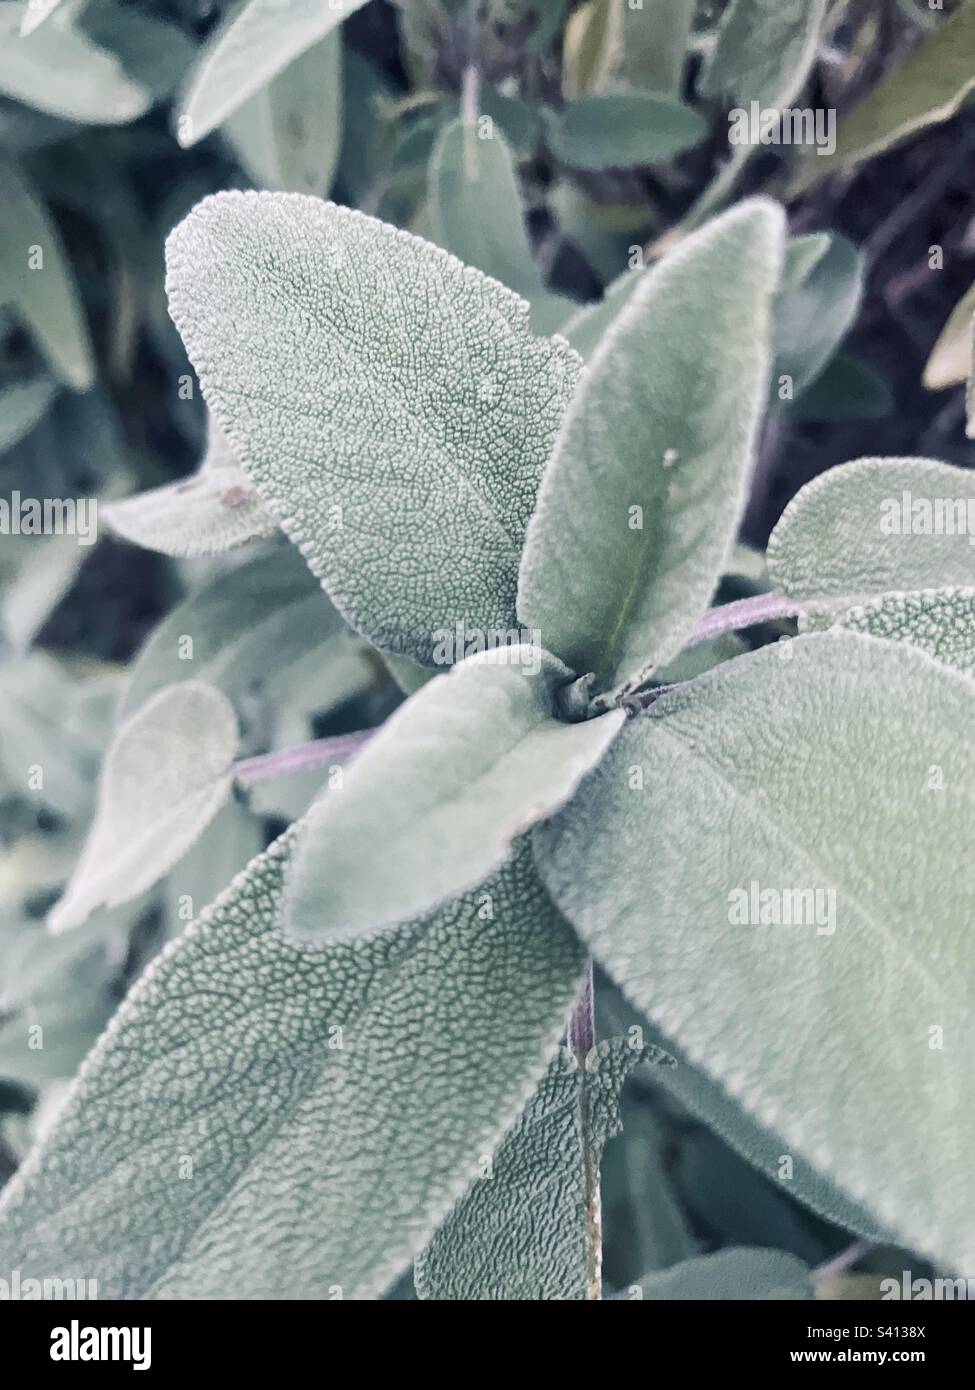 Salvia officinalis, or common sage, perennial growing in the garden, a plant that have both culinary and medicinal uses. Stock Photo